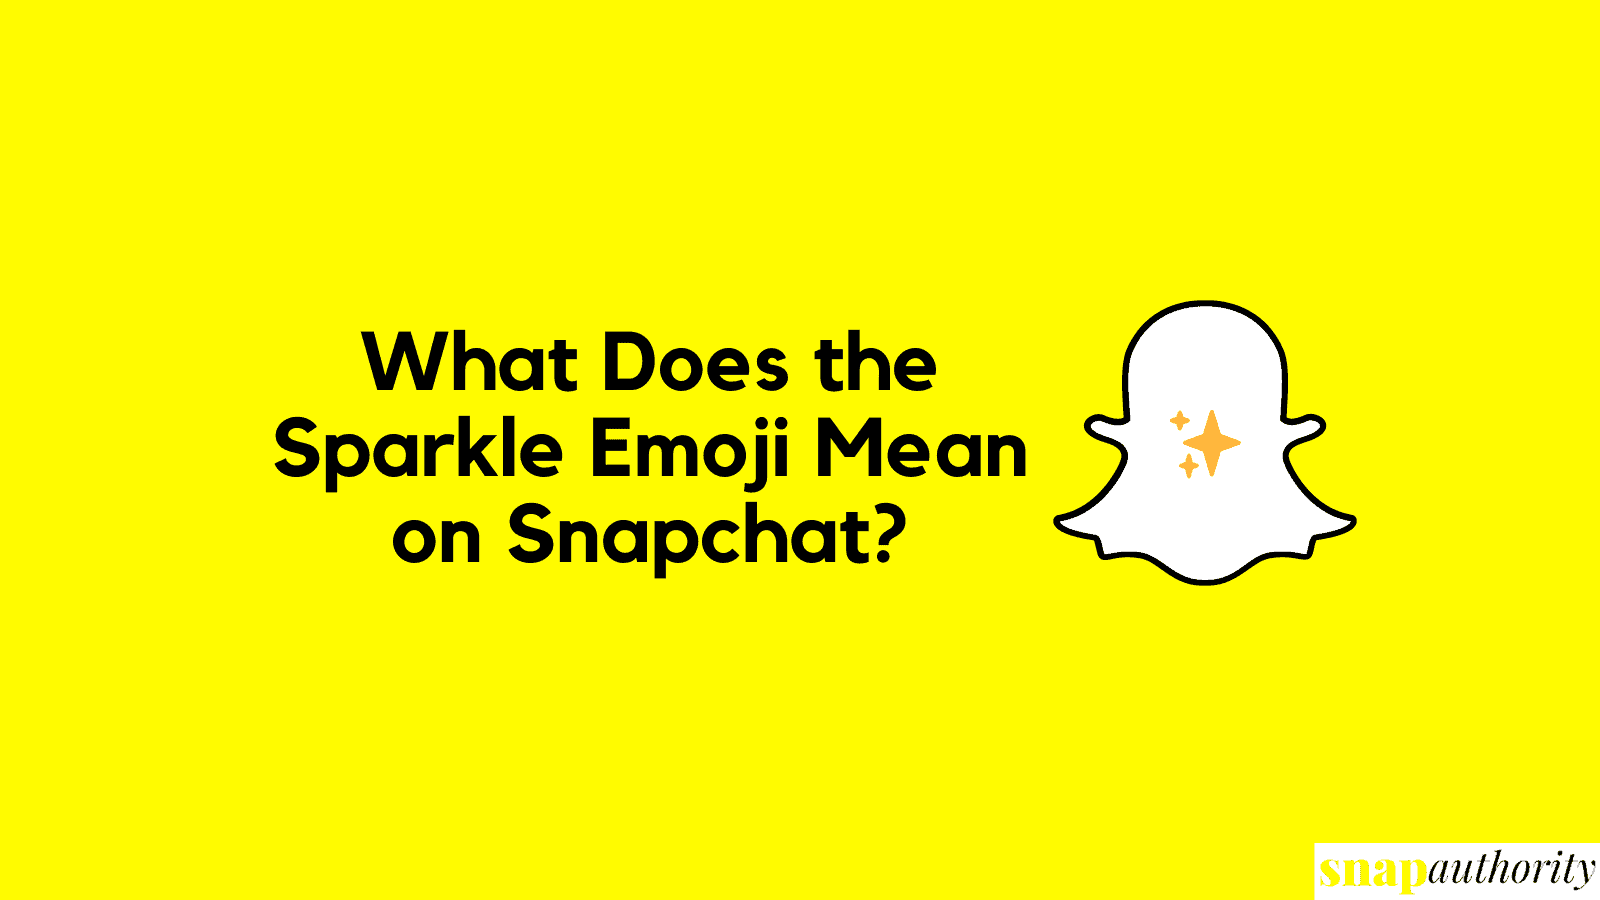 what does sparkle emoji mean on snapchat?